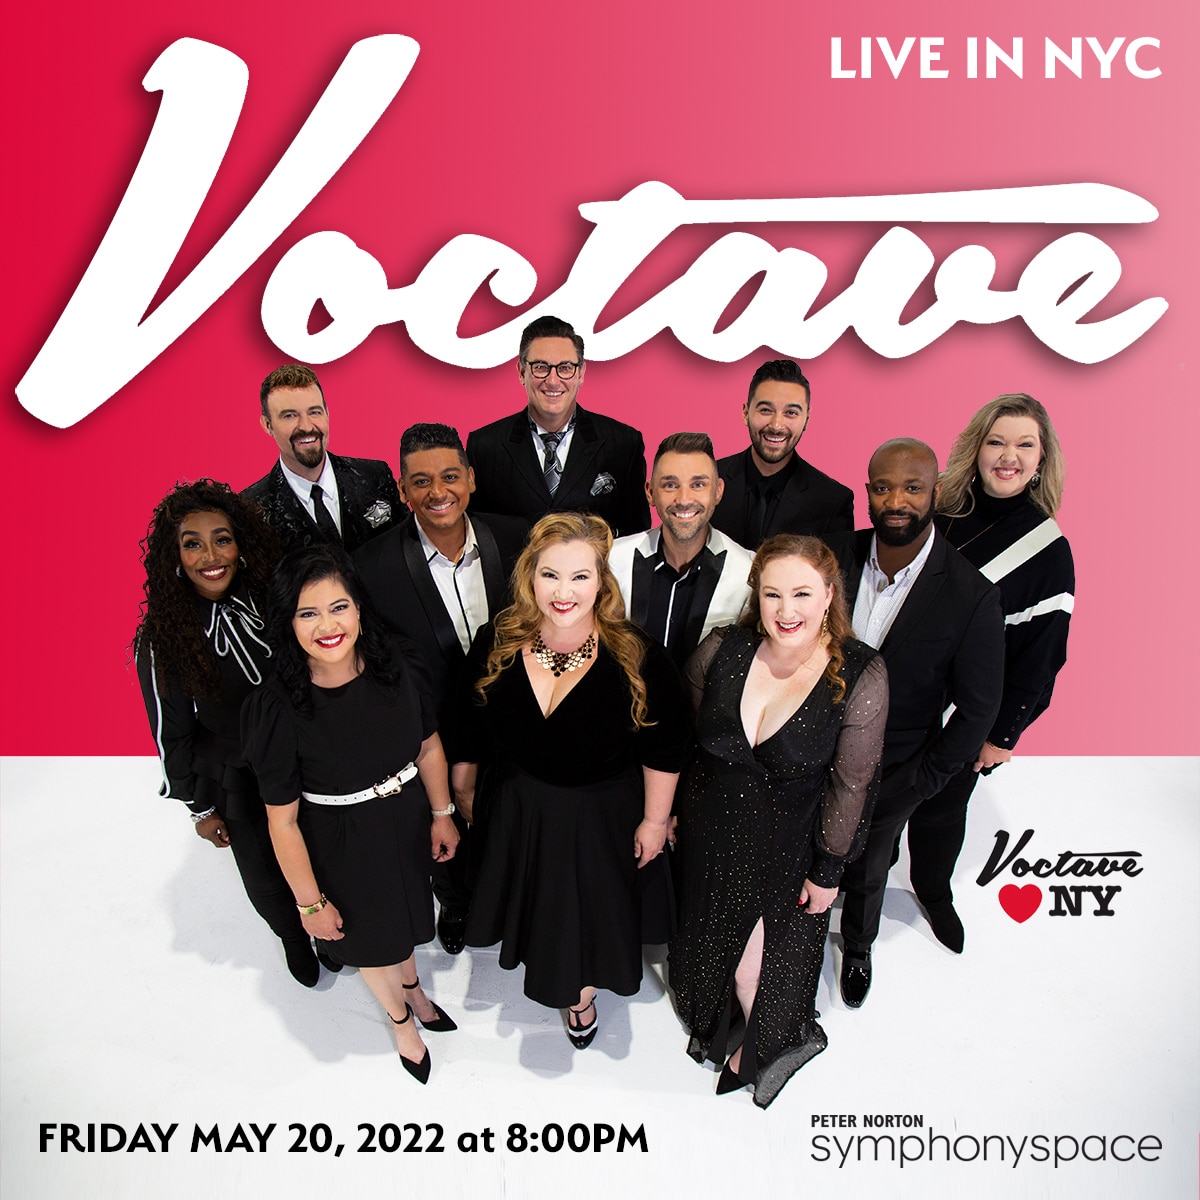 Voctave Live in NYC Opus 3 Artists